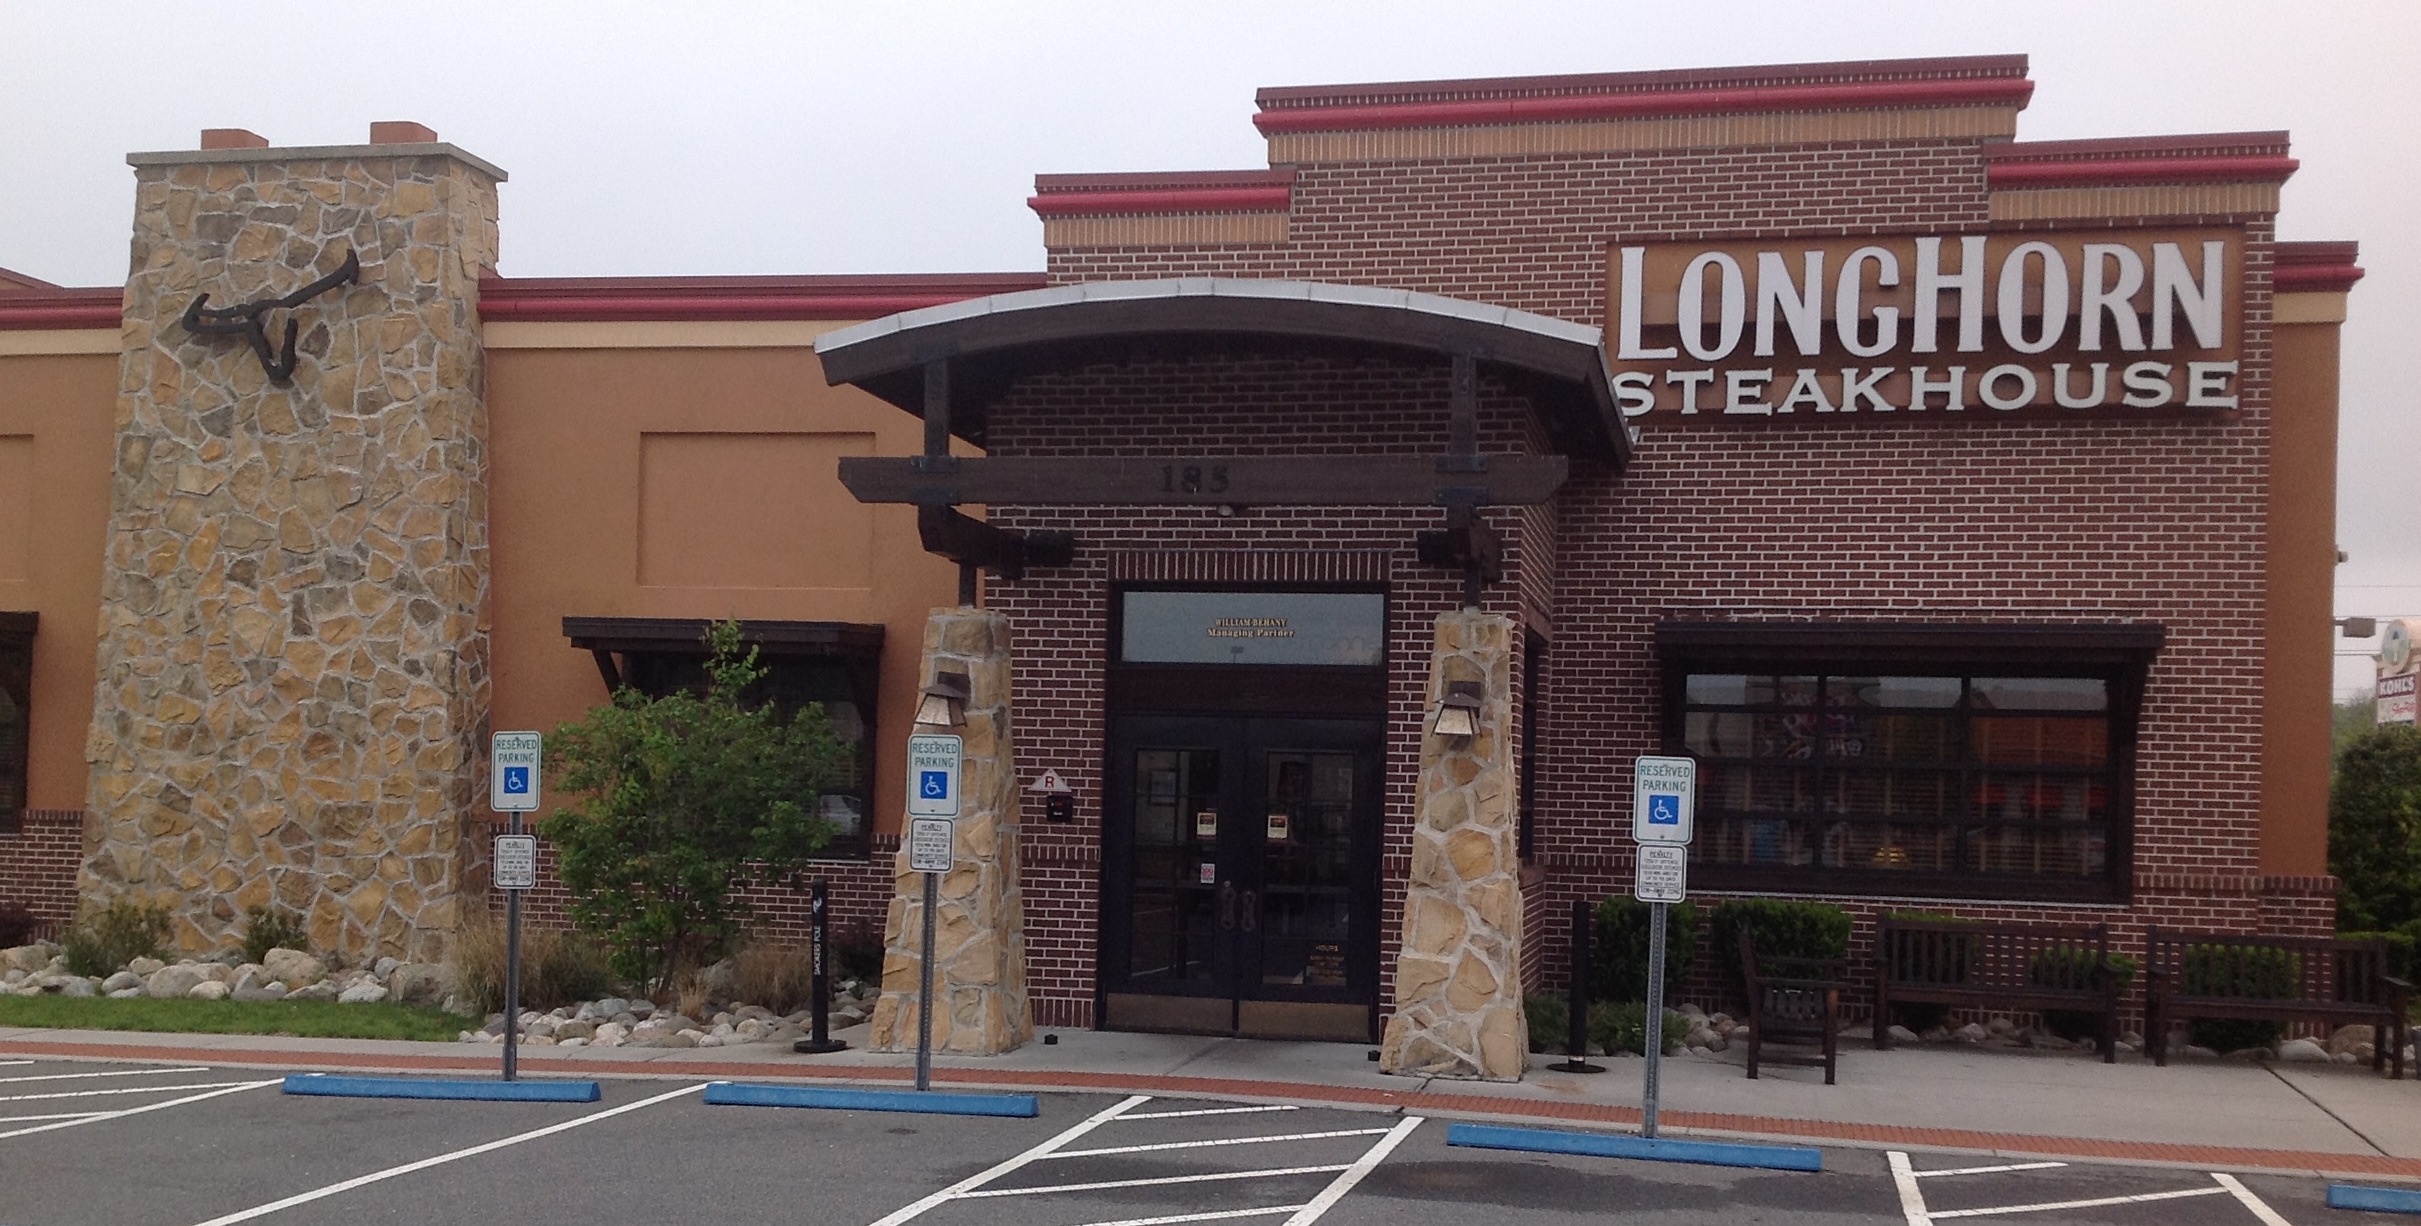 LongHorn Steakhouse | Eatin' Out From Ewing2421 x 1226